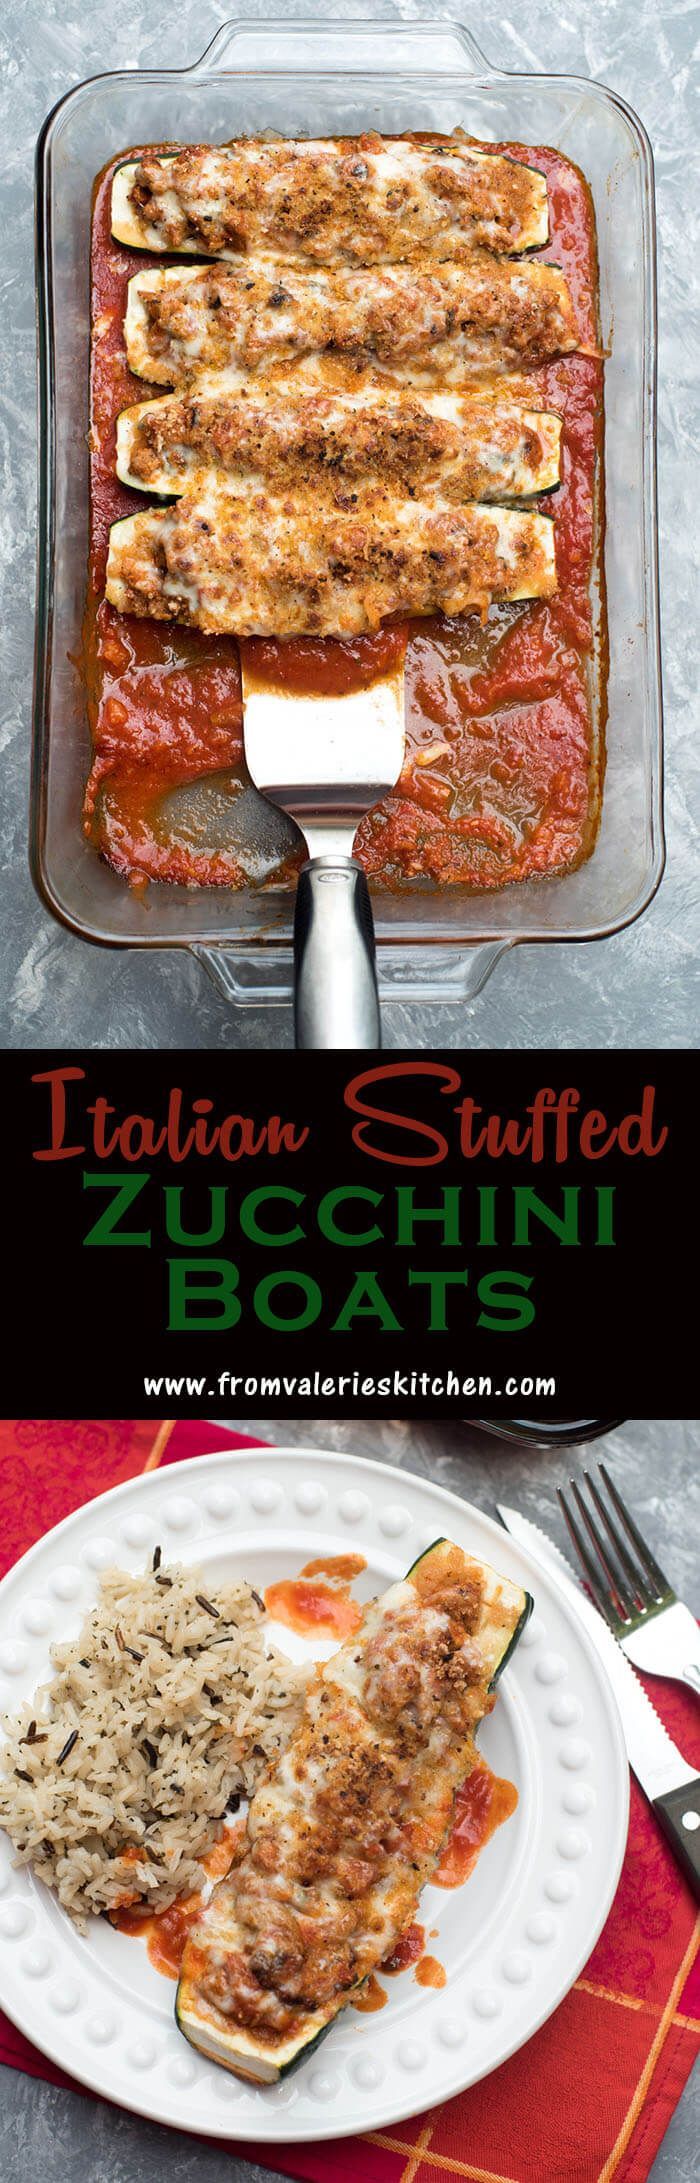 These low-carb Italian Stuffed Zucchini Boats are packed with flavor and nutrition! A lean turkey and veggie filling is topped